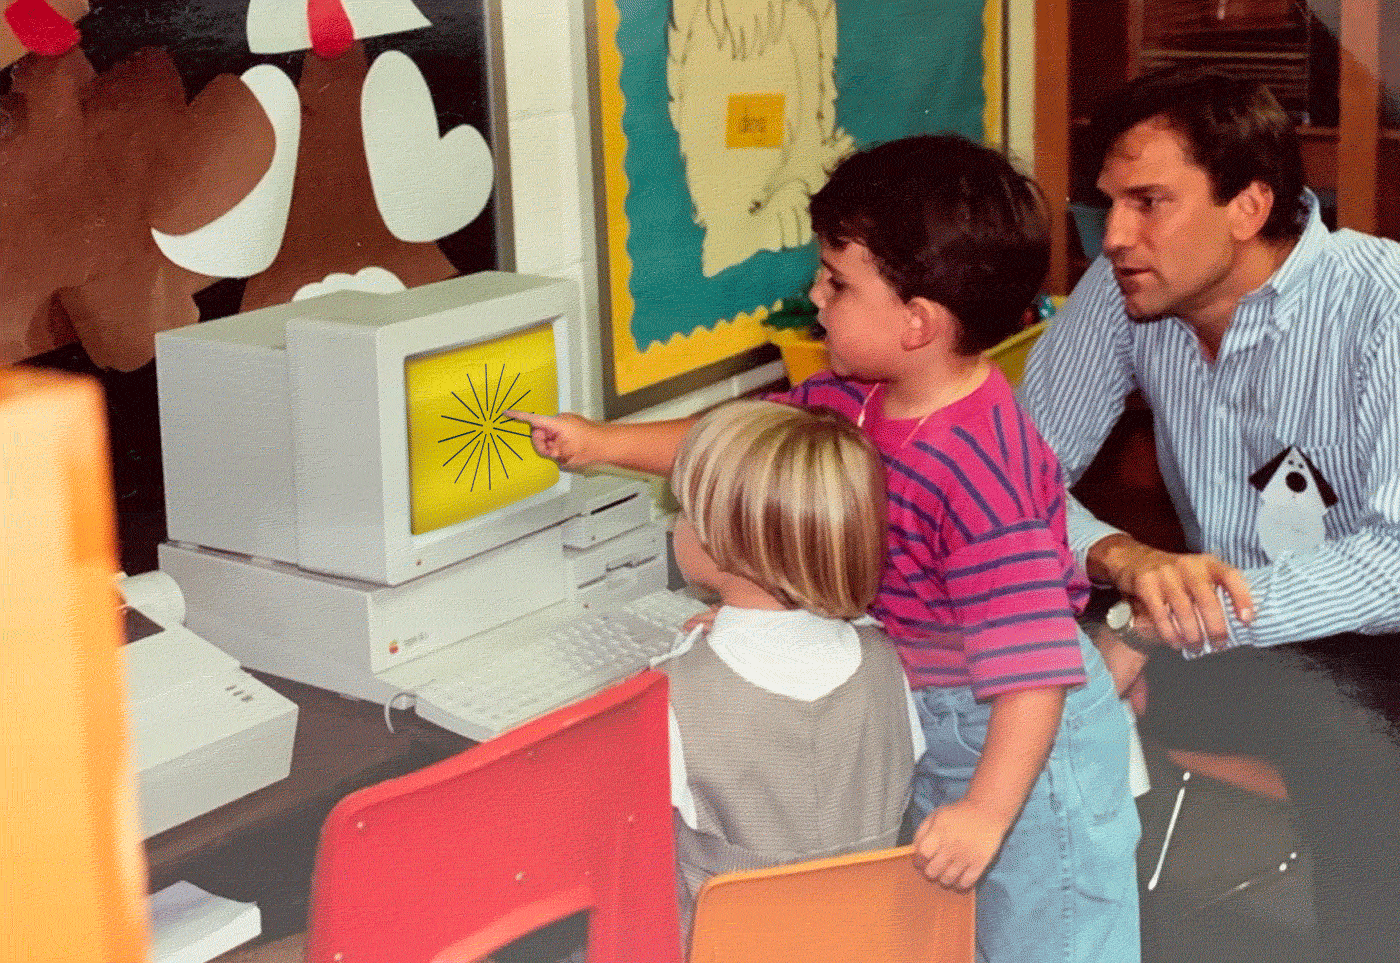 A photo of me in a classroom as a child in the 90s, leaning over the shoulder of a friend, at a CRT computer monitor. On the screen is an animated image with a starburst, the words "thank you for subscribing", and then a smiley face.